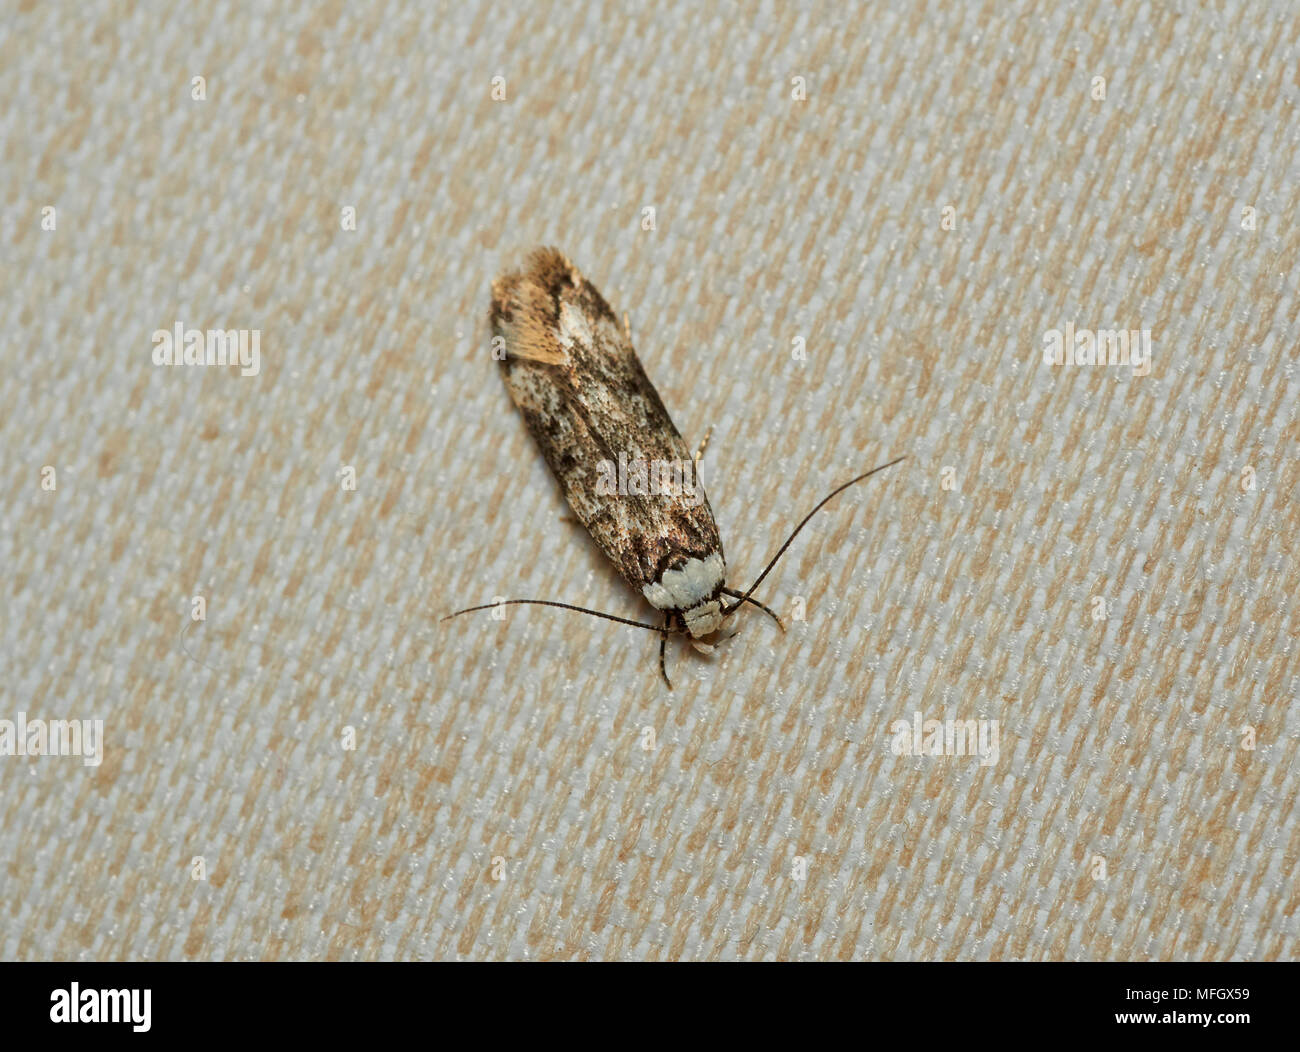 WHITE-SHOULDERED HOUSE MOTH (Endrosis sarcitrella) Sussex, England ...